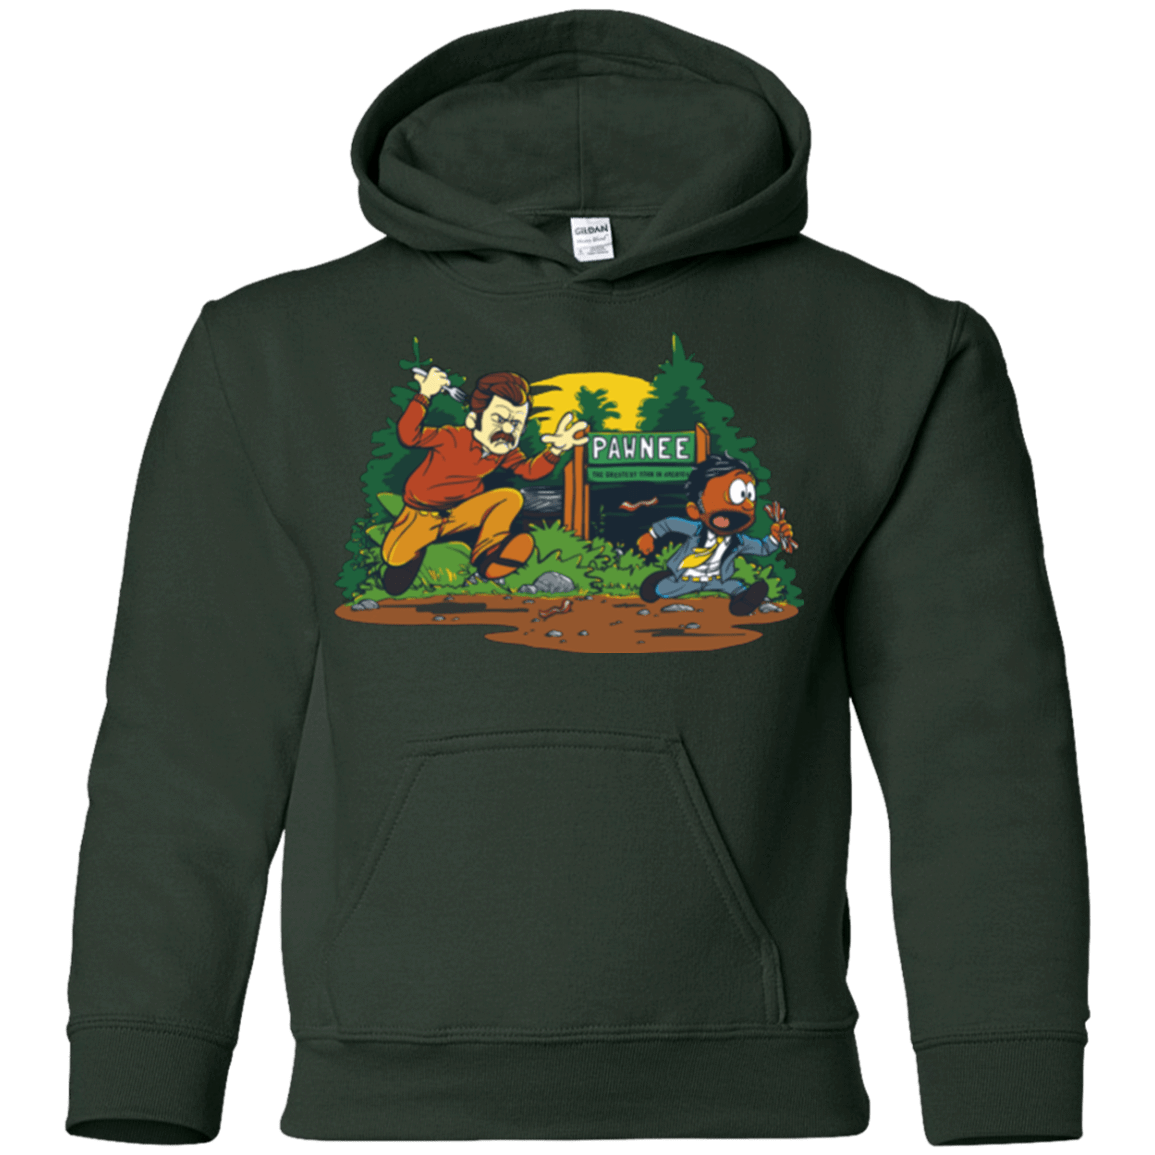 Sweatshirts Forest Green / YS Ron & Tom Youth Hoodie